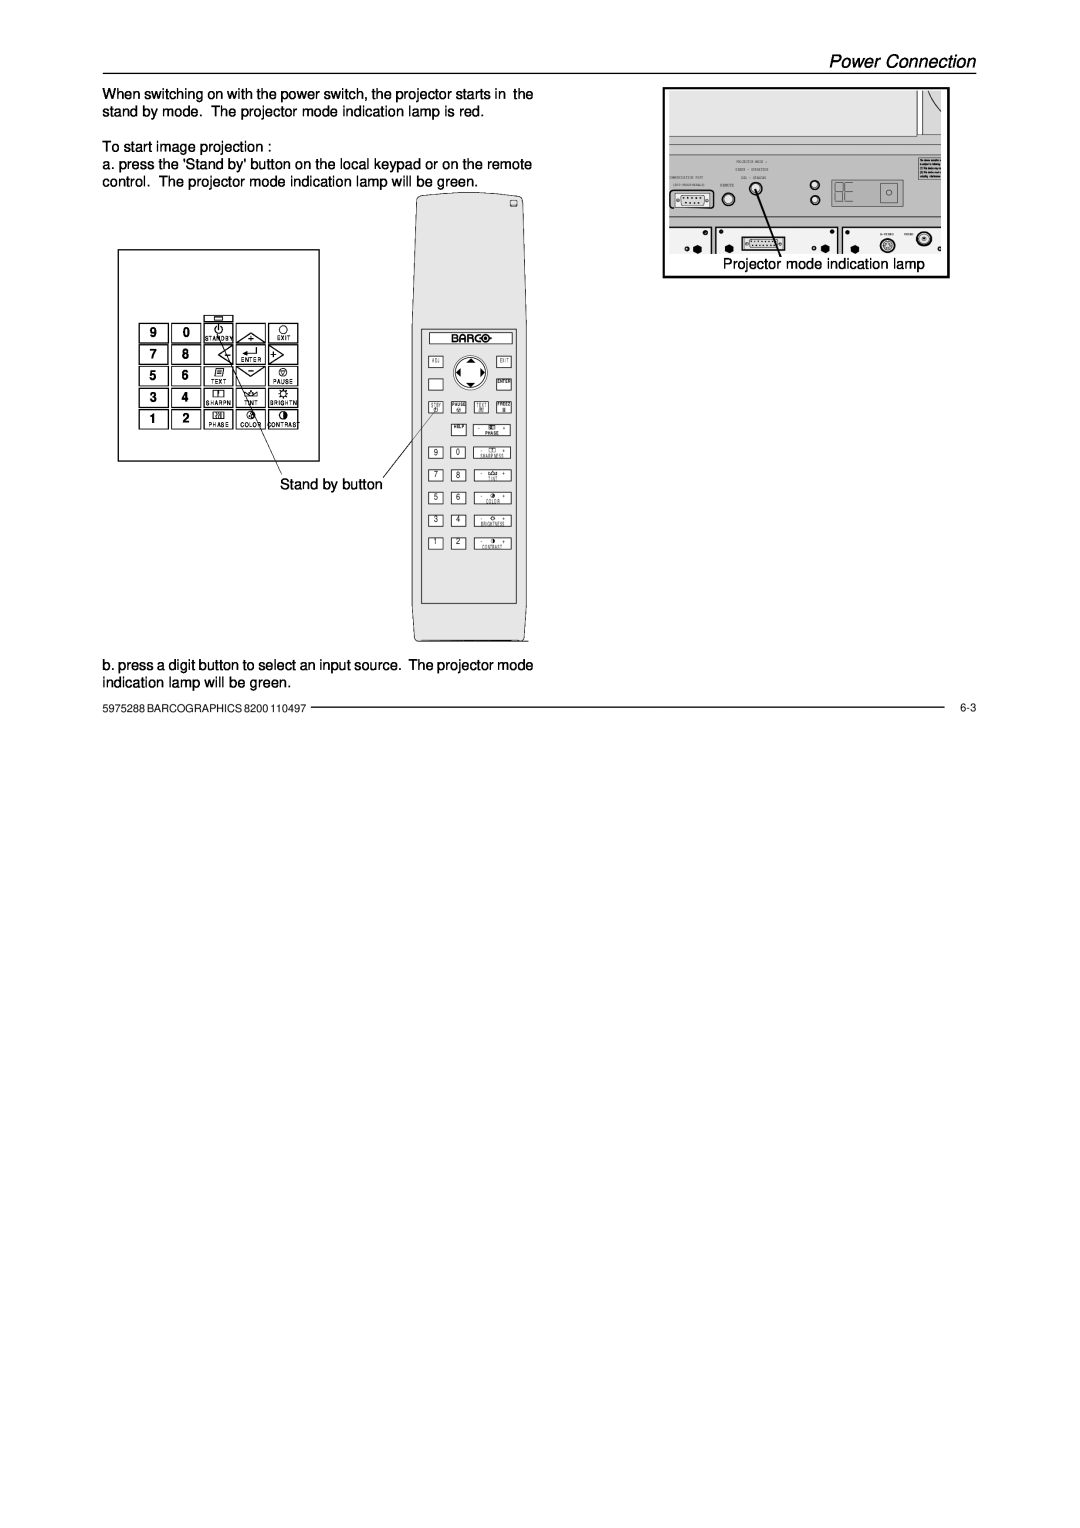 Barco R9001330 owner manual Power Connection, To start image projection 